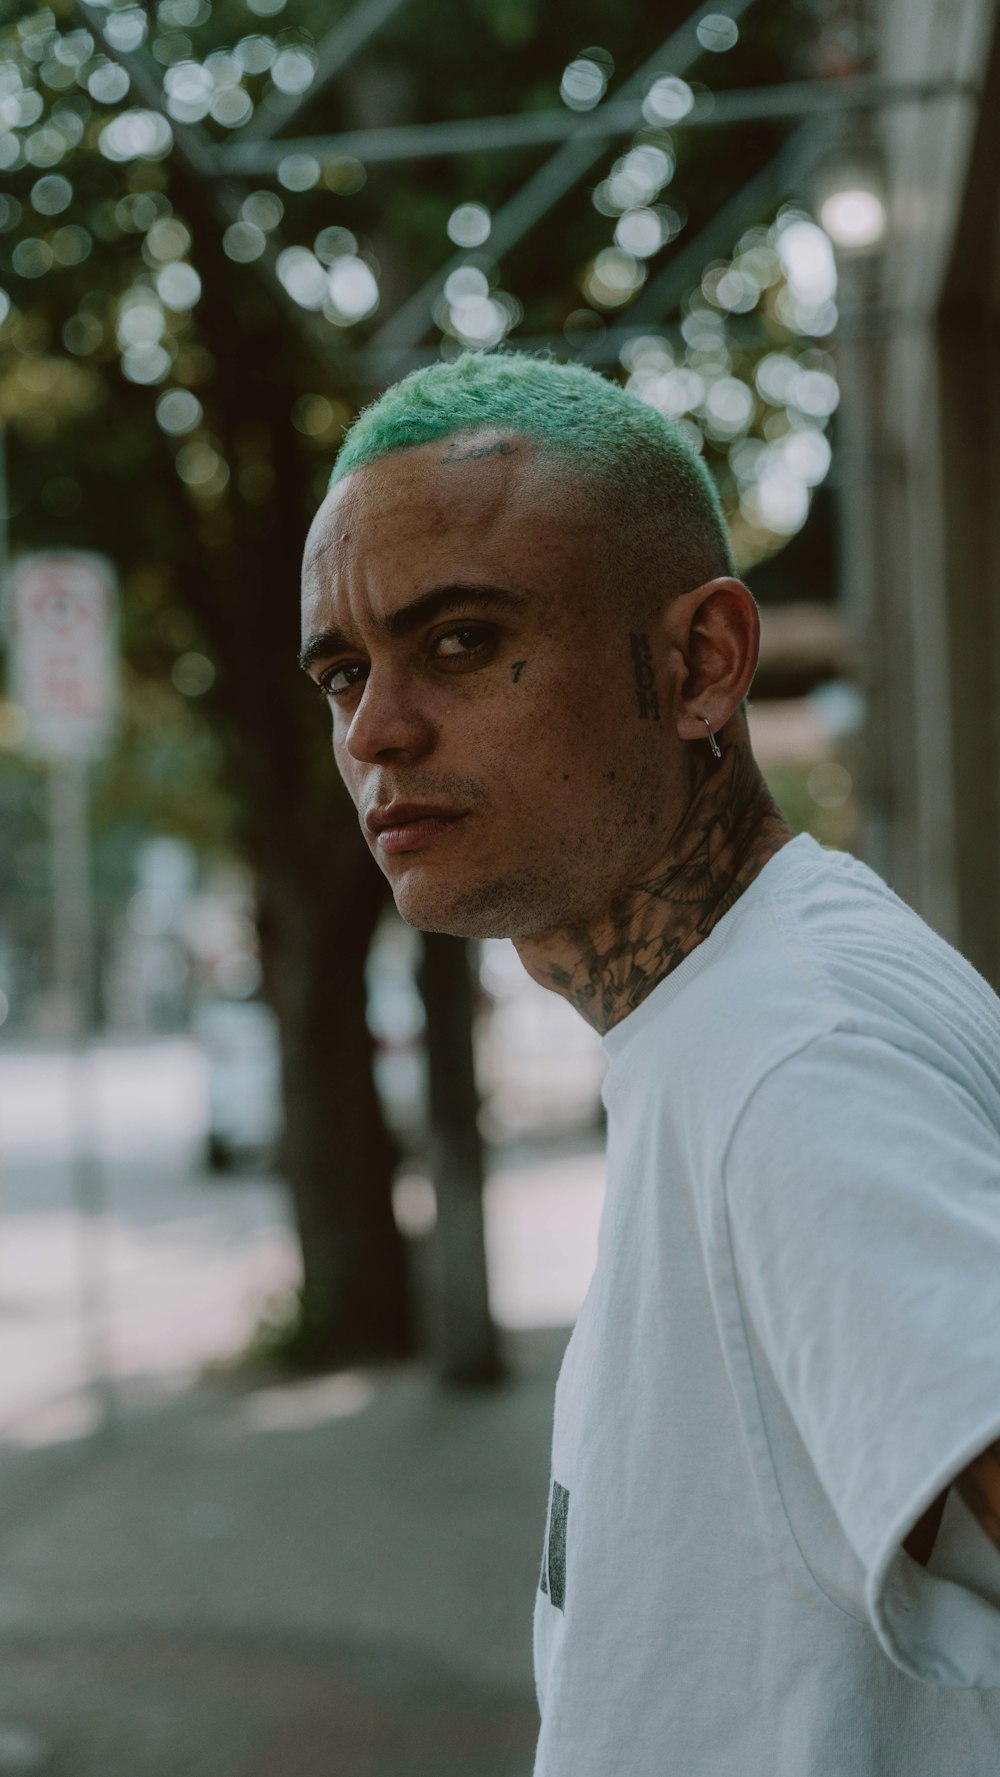 a man with green hair and piercings on his head